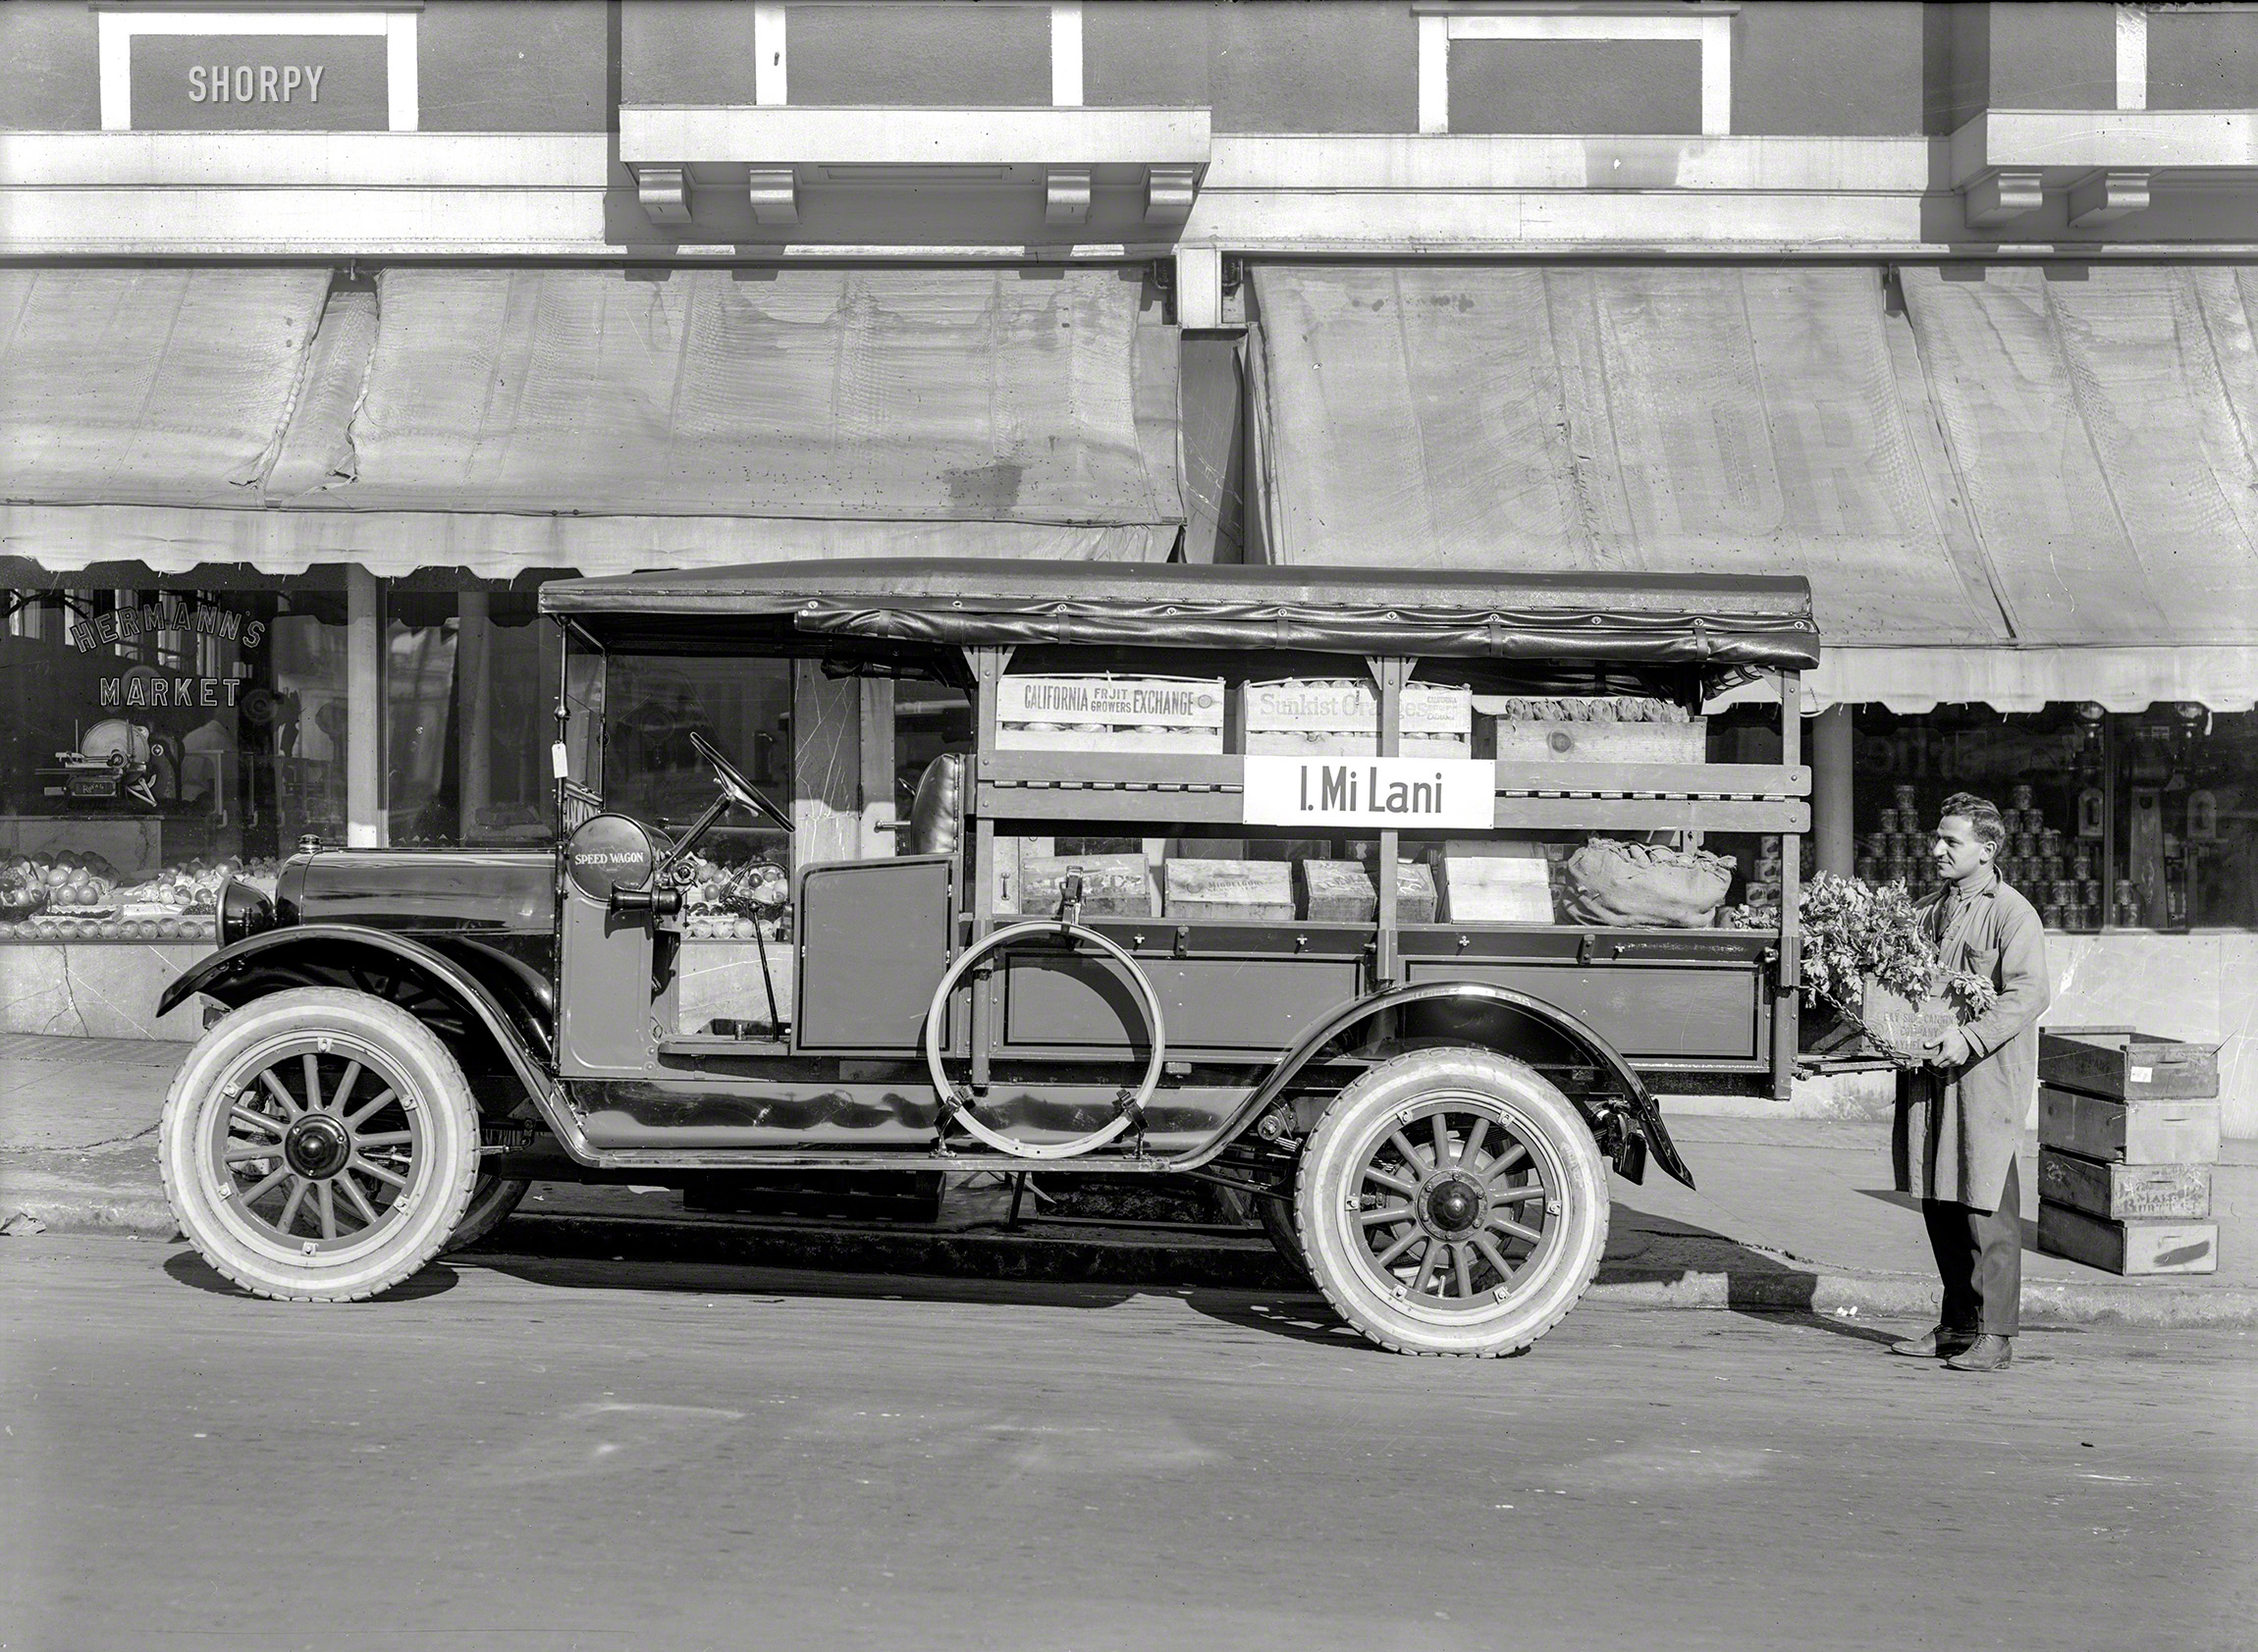 San Francisco ca. 1920. "I. Mi Lani -- REO Speed Wagon delivery truck." Also known as the Flying Artichoke. 5x7 glass plate by Chris Helin. View full size.